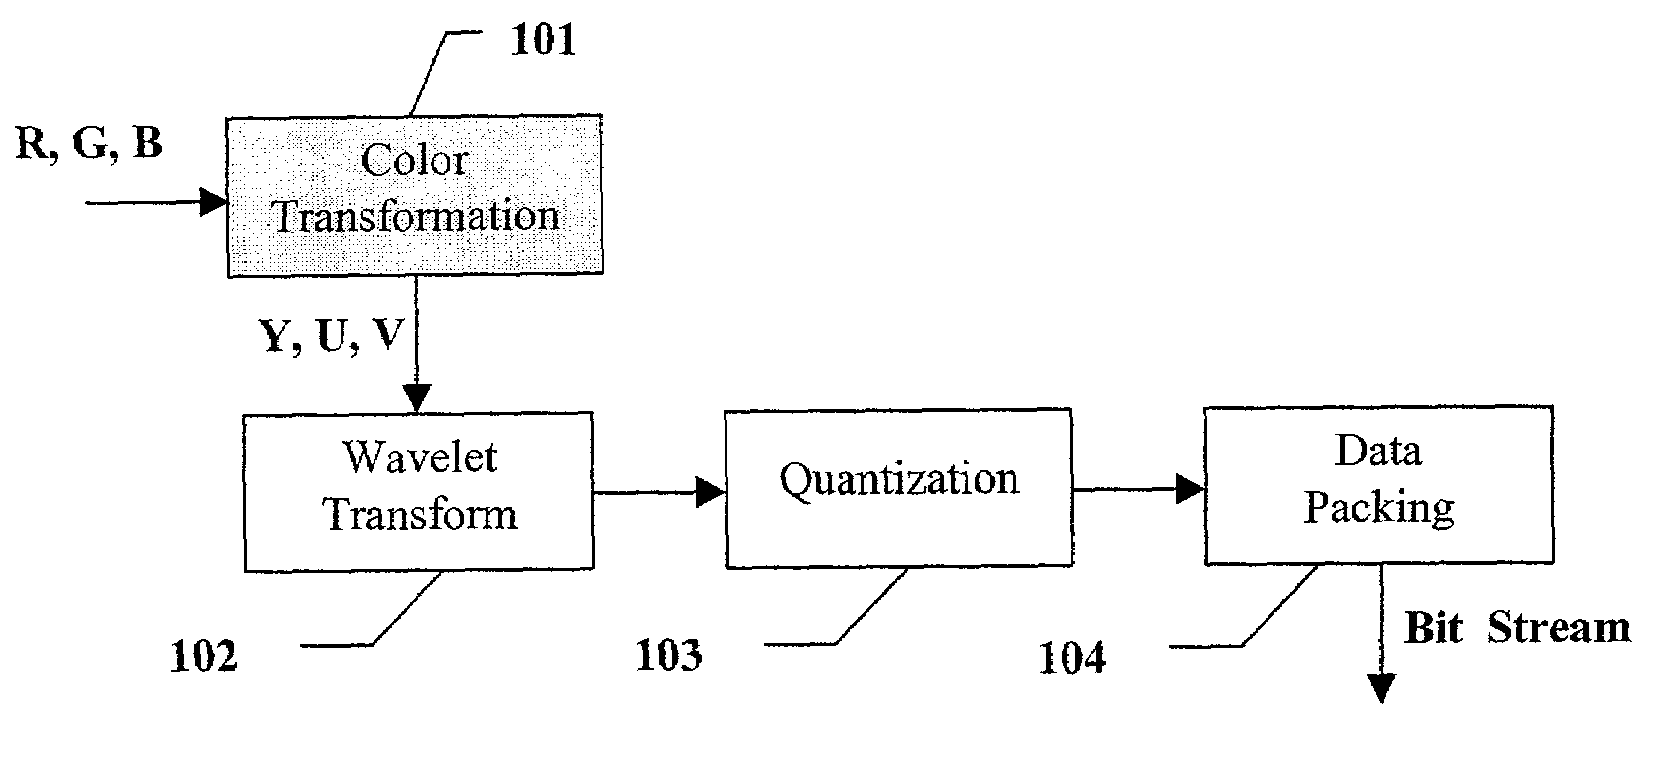 Apparatus and method for image/video compression using discrete wavelet transform